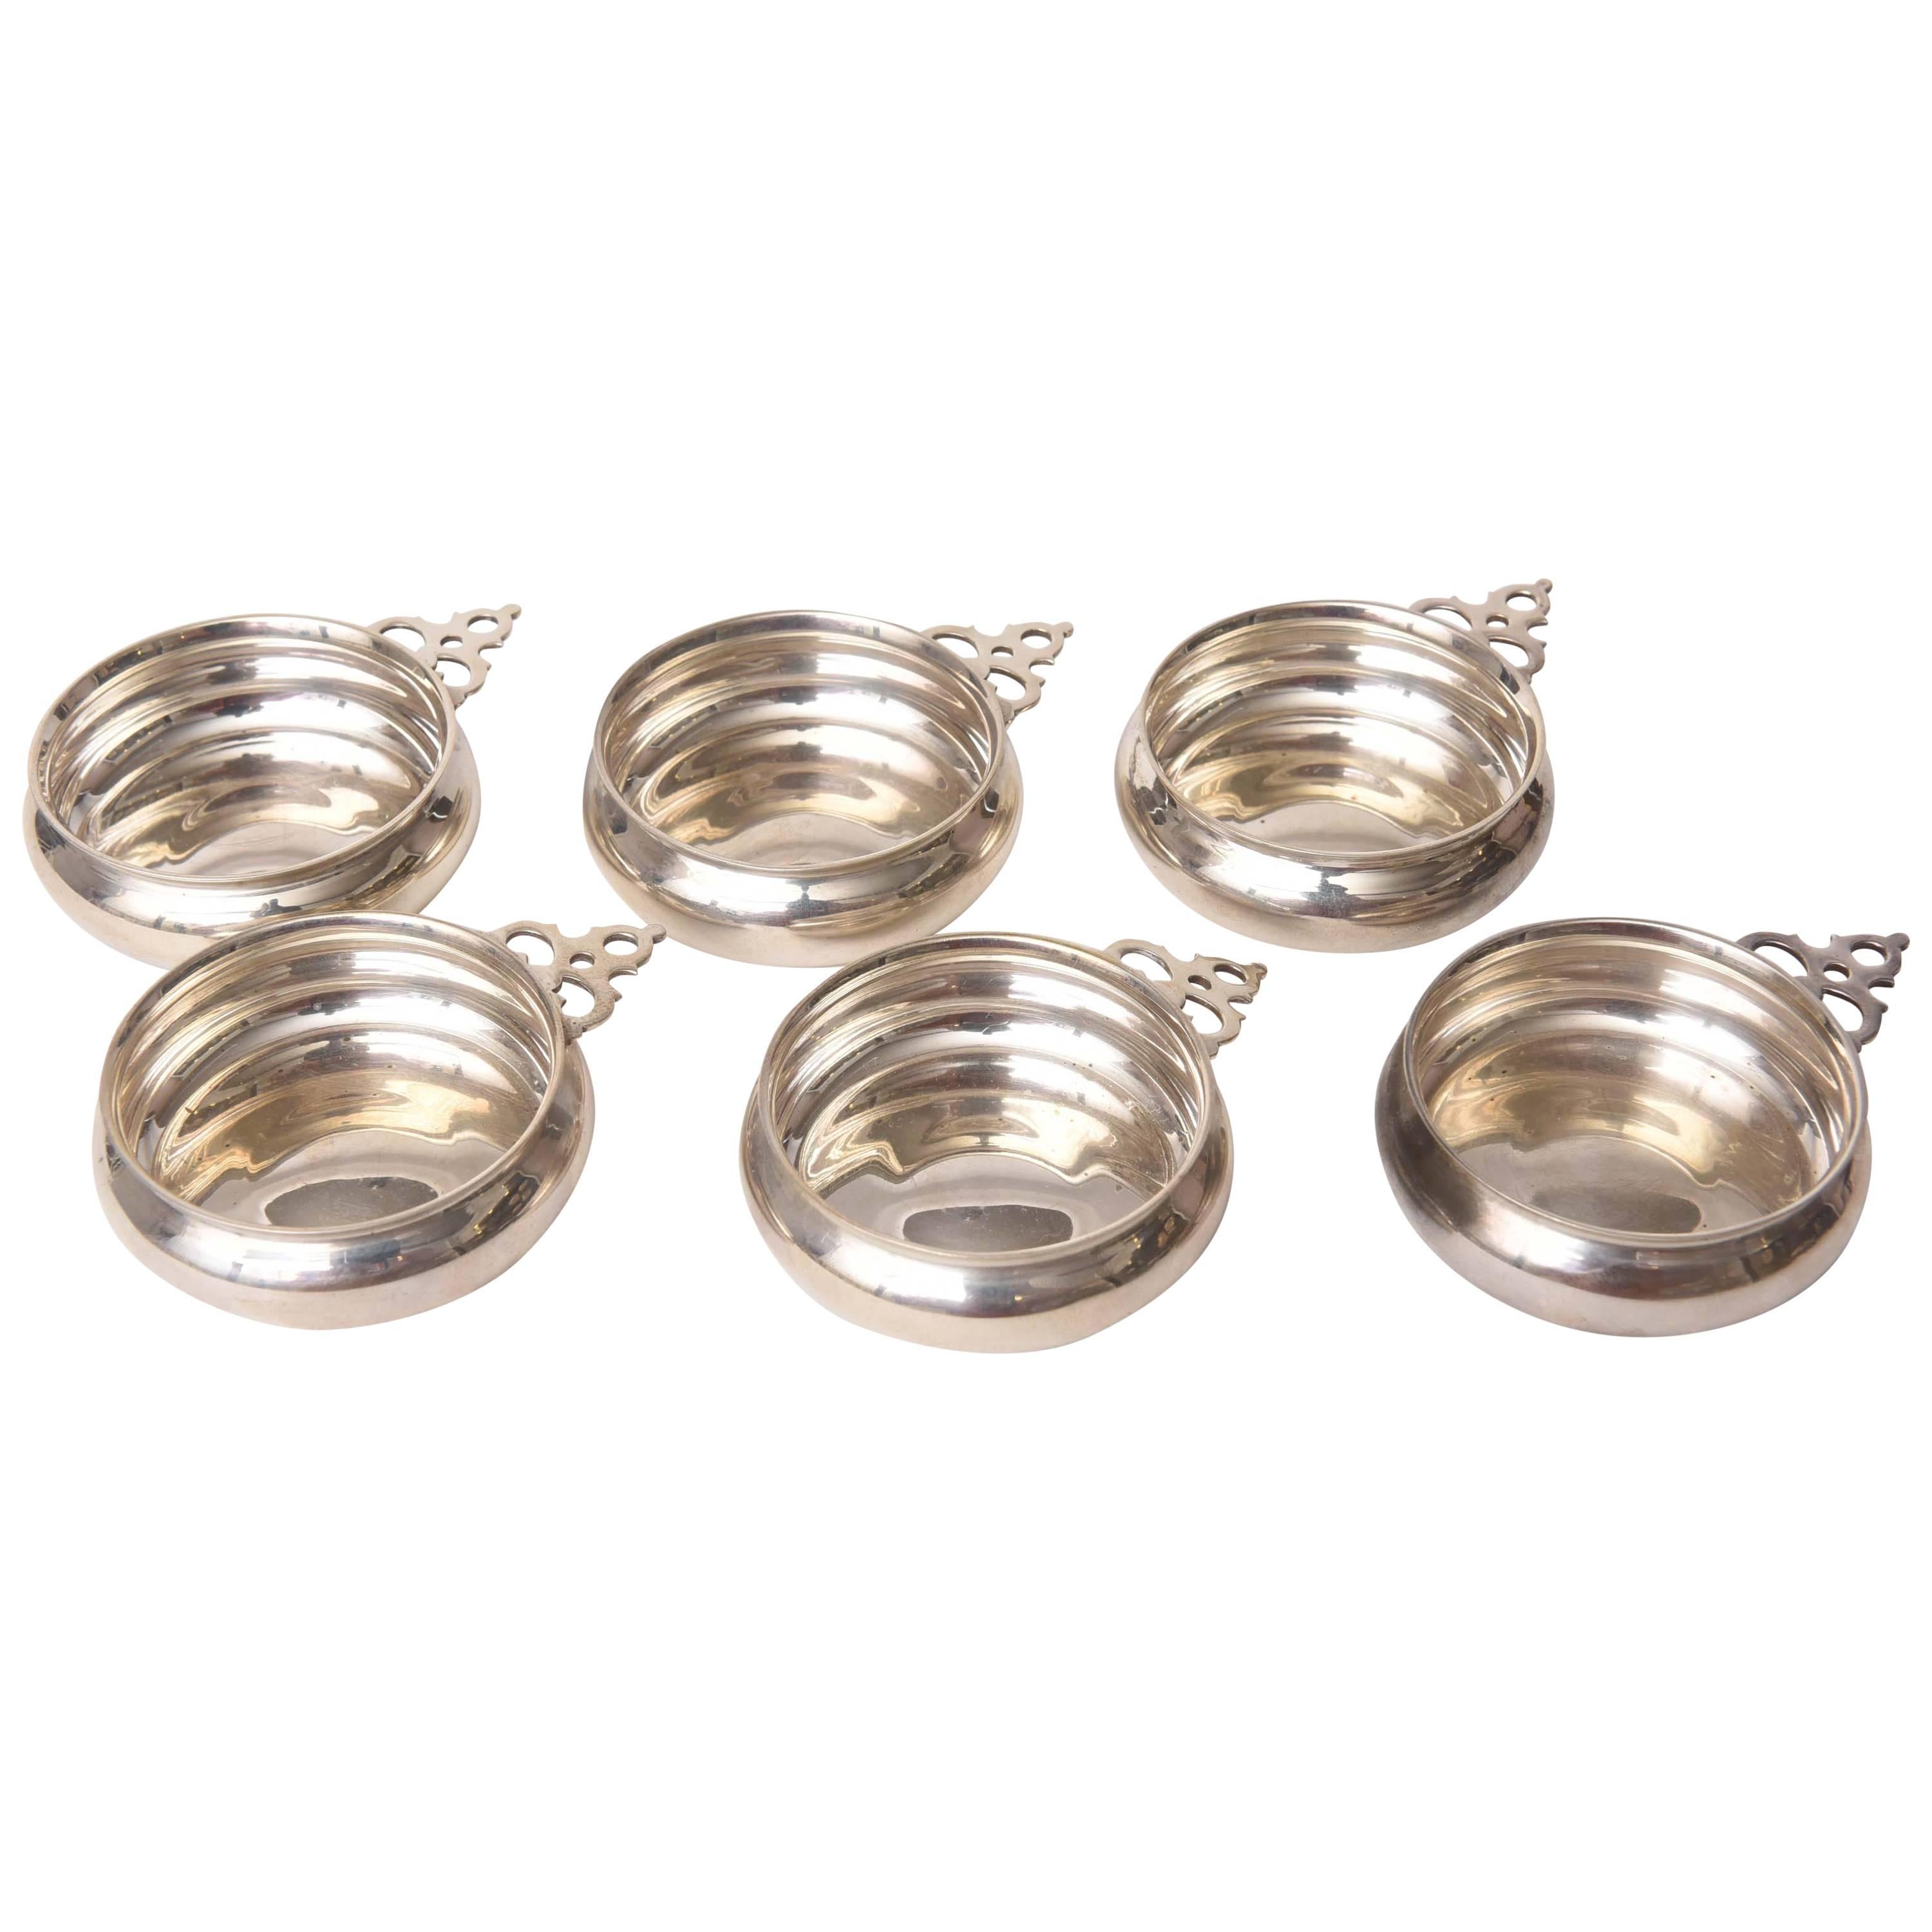 Set of Six (6) Tiffany Sterling Wine Tasters, Vintage and Classic Shape